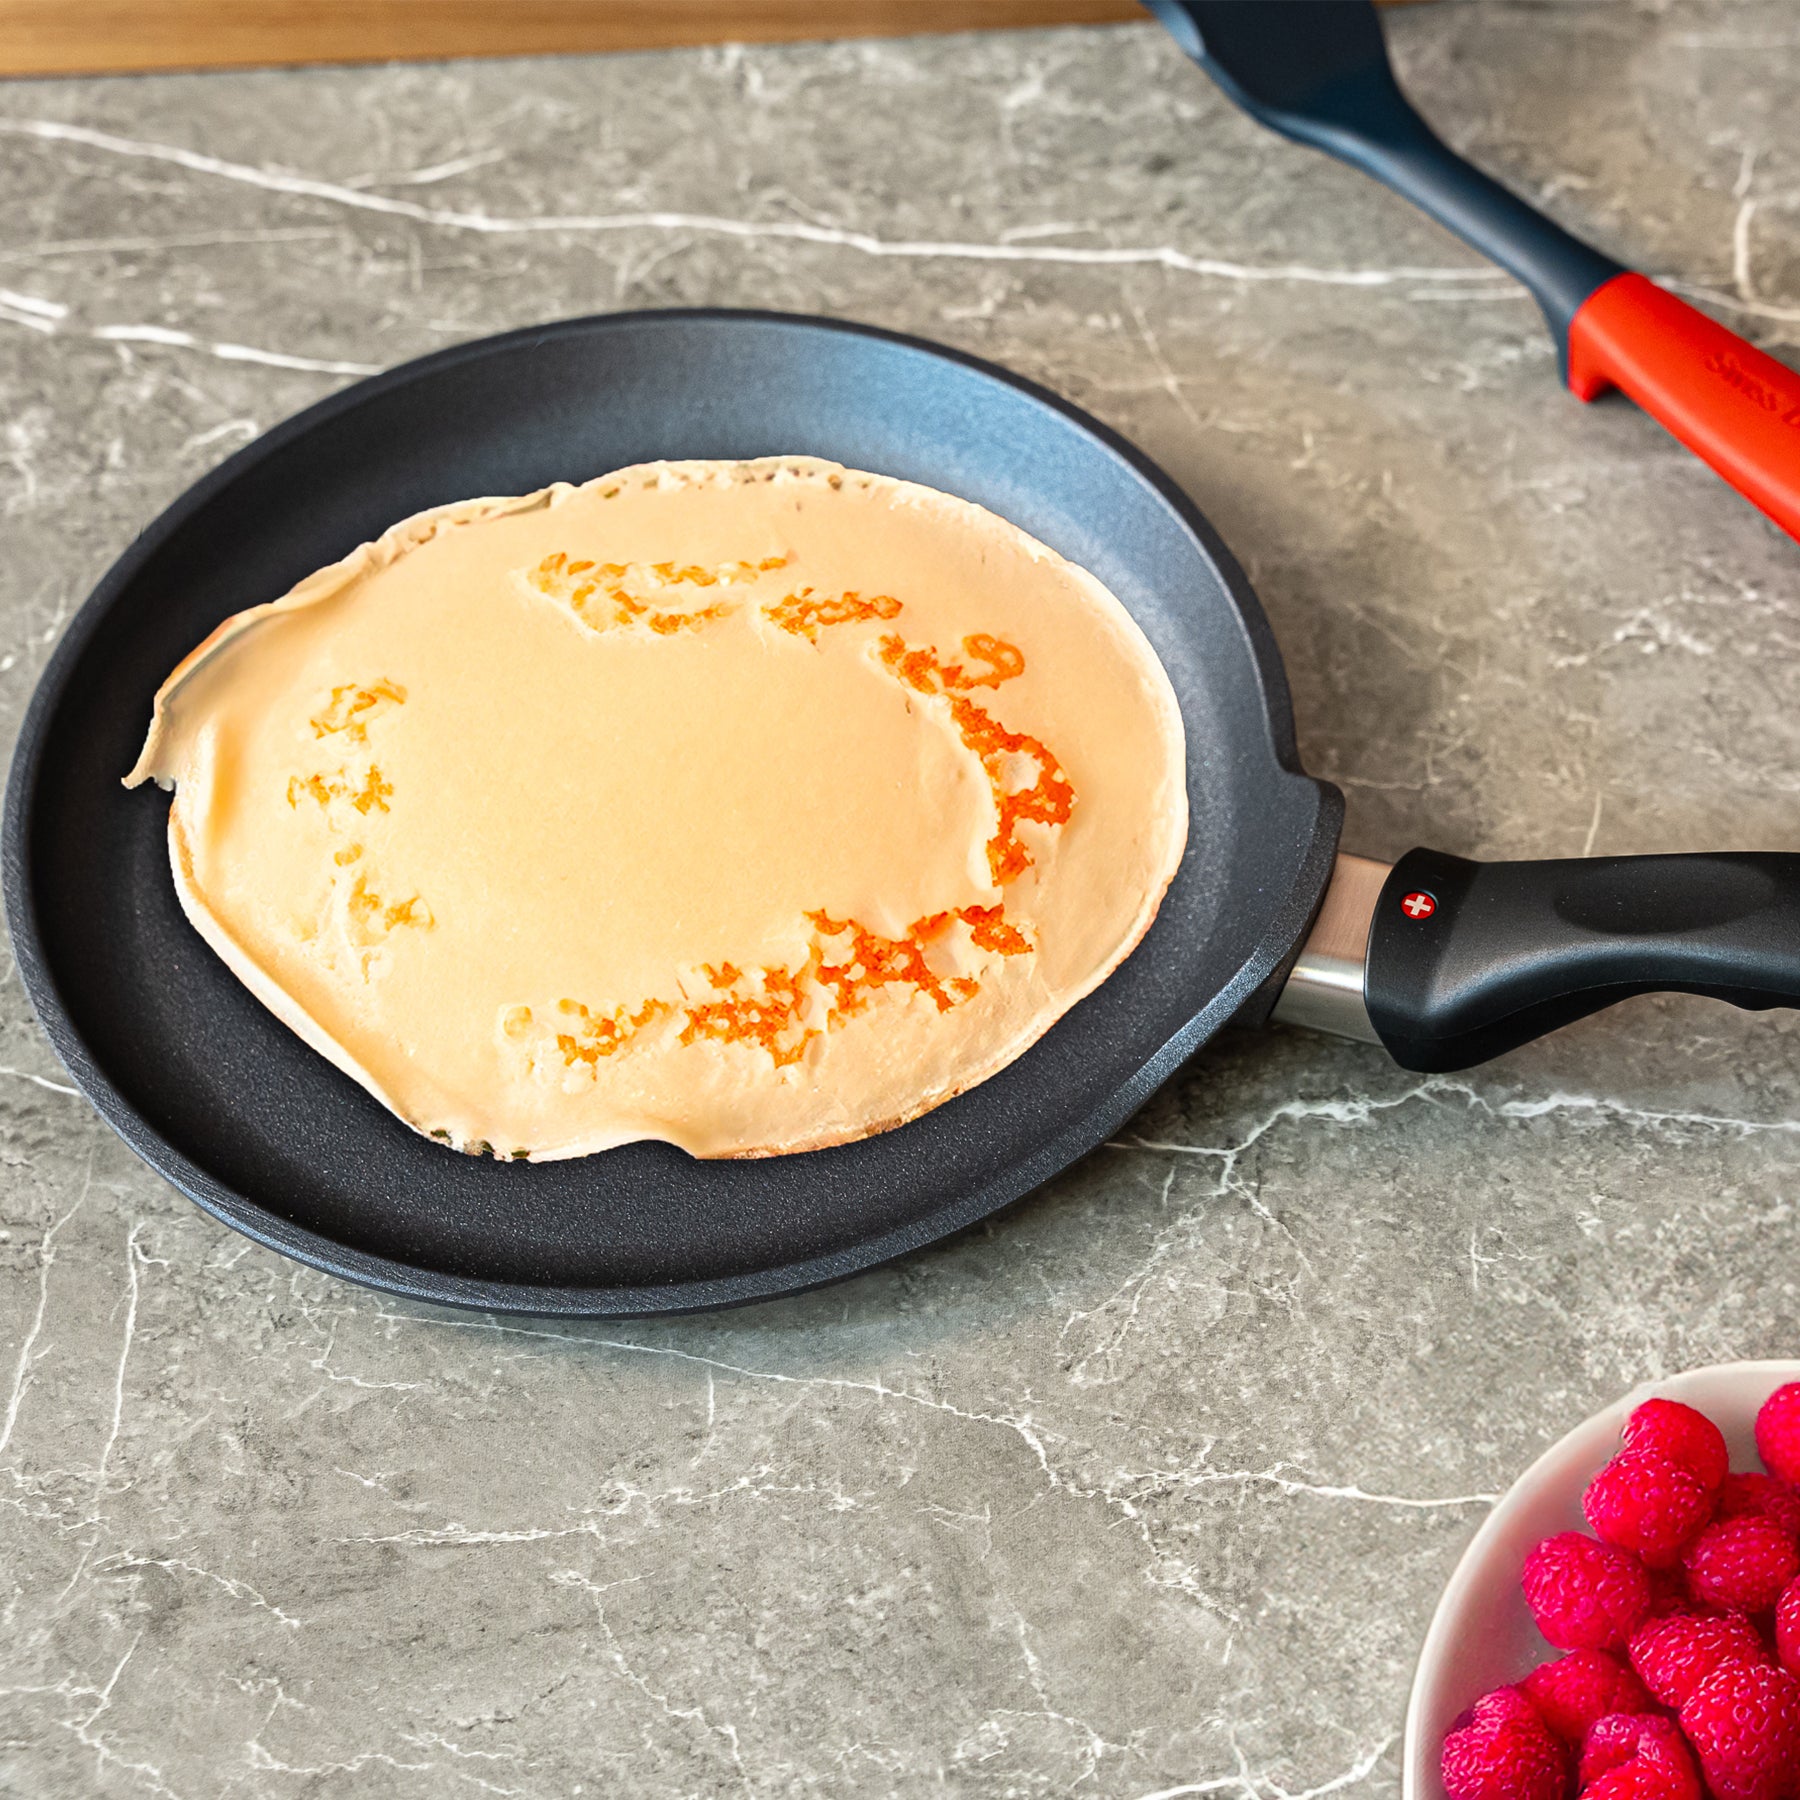 HD Nonstick Crepe Pan - in use with crepe on surface